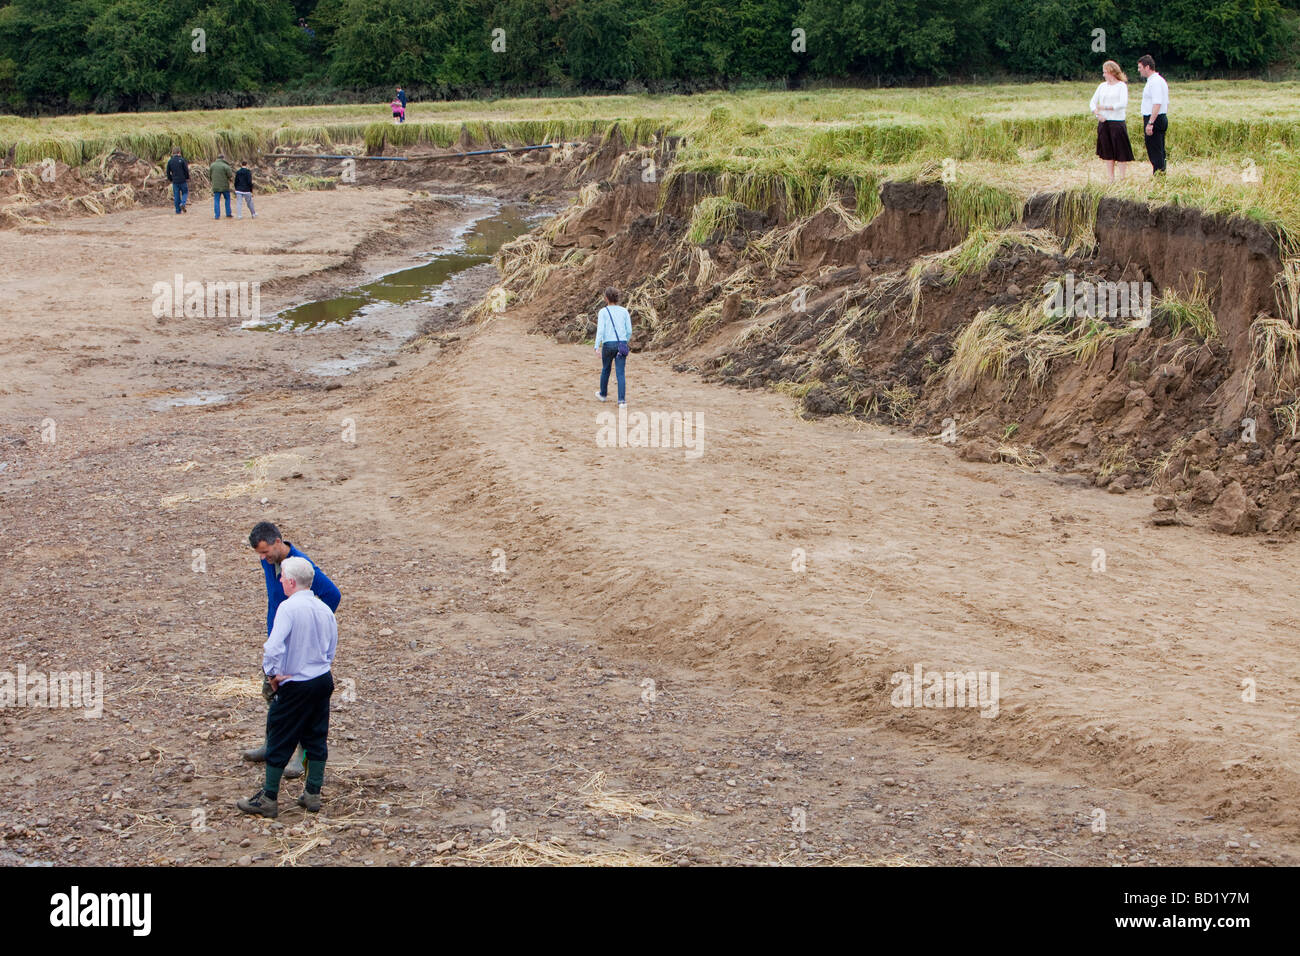 The Durham Canyon caused by flooding that washed away thousands of tons of soil, Durham, UK. Stock Photo